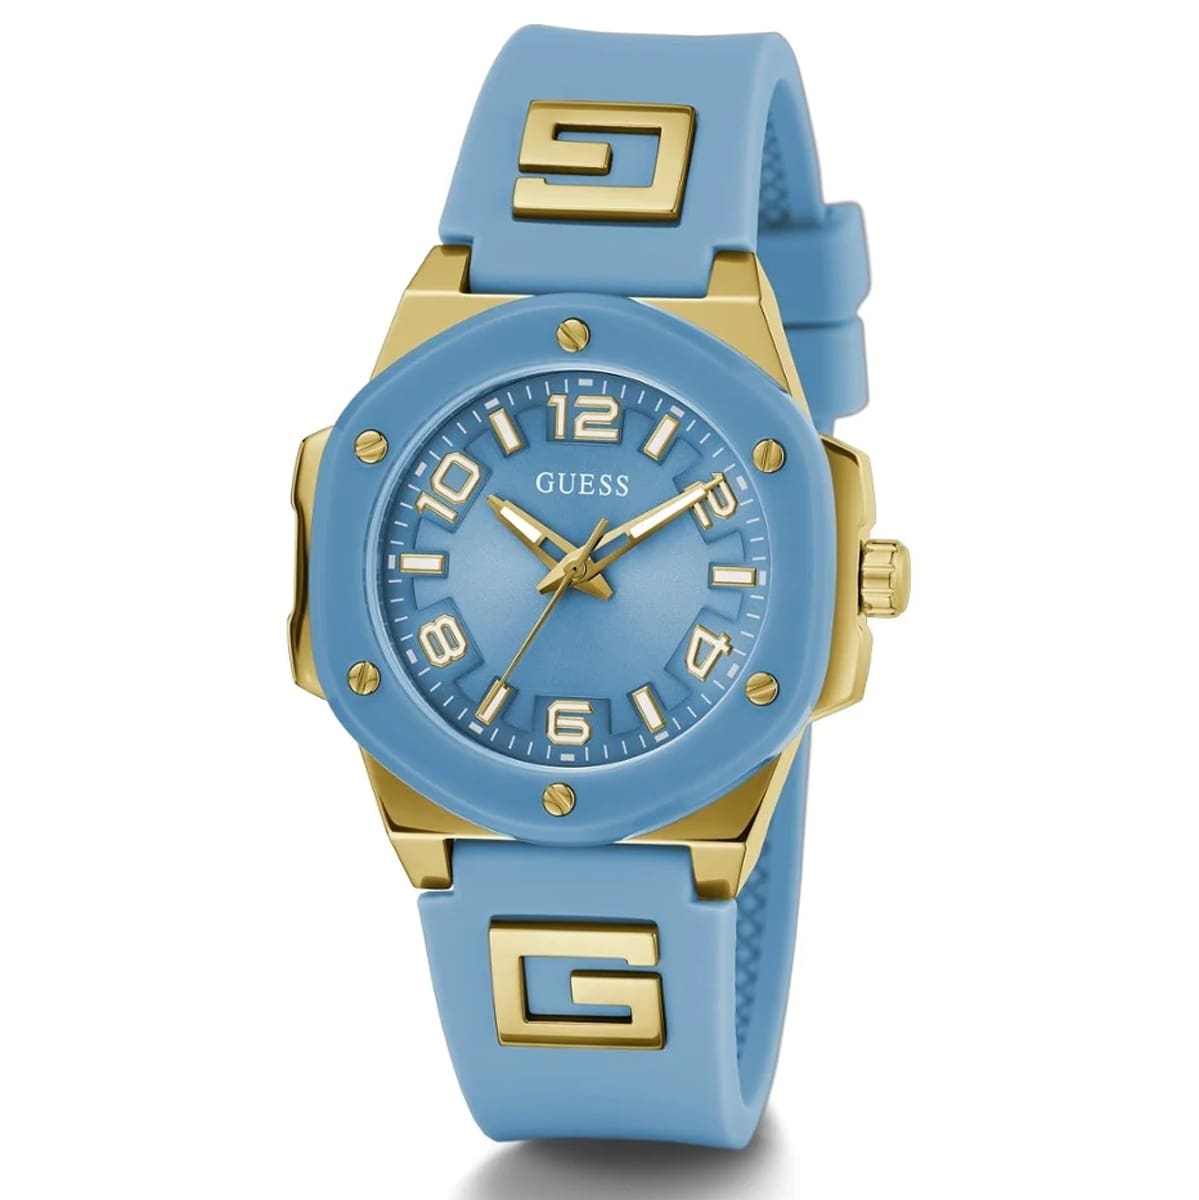 MONTRE GUESS G HYPE FEMME SILICONE